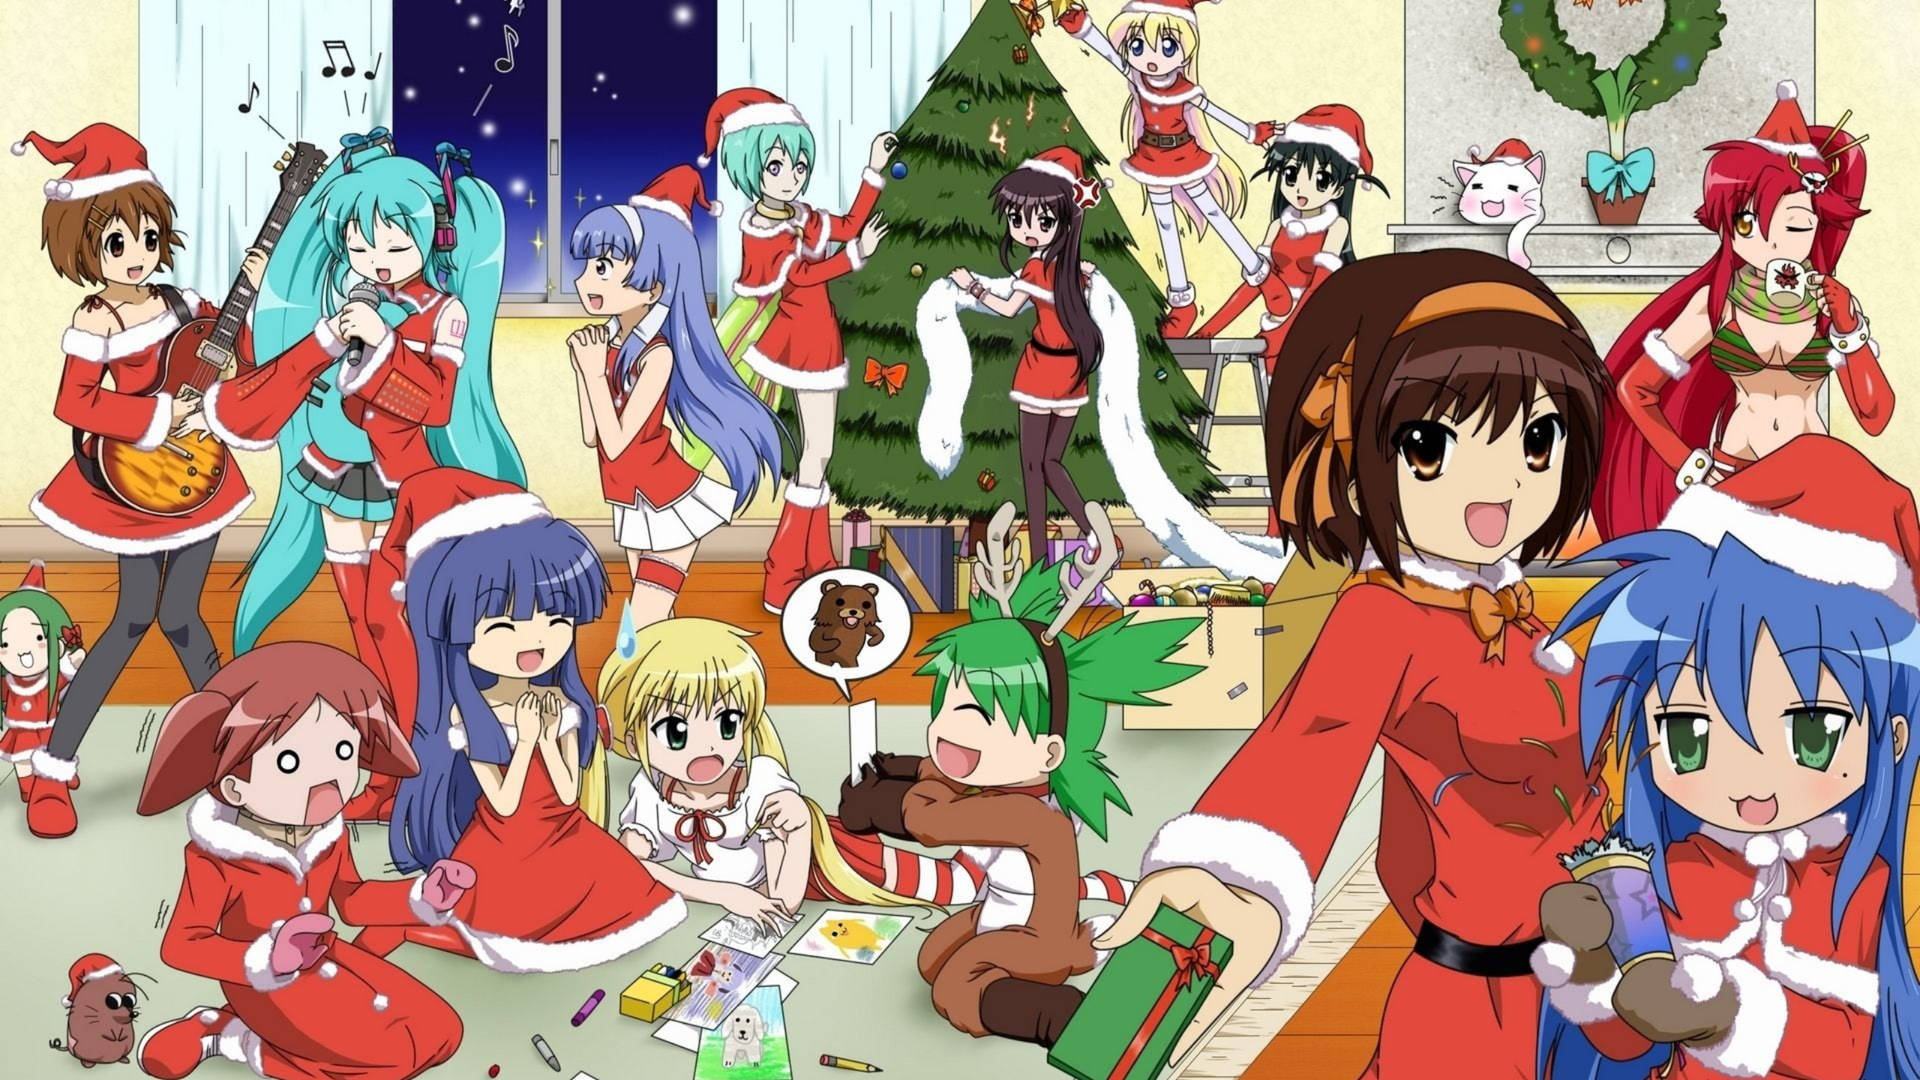 Anime Christmas Party With Girl Characters